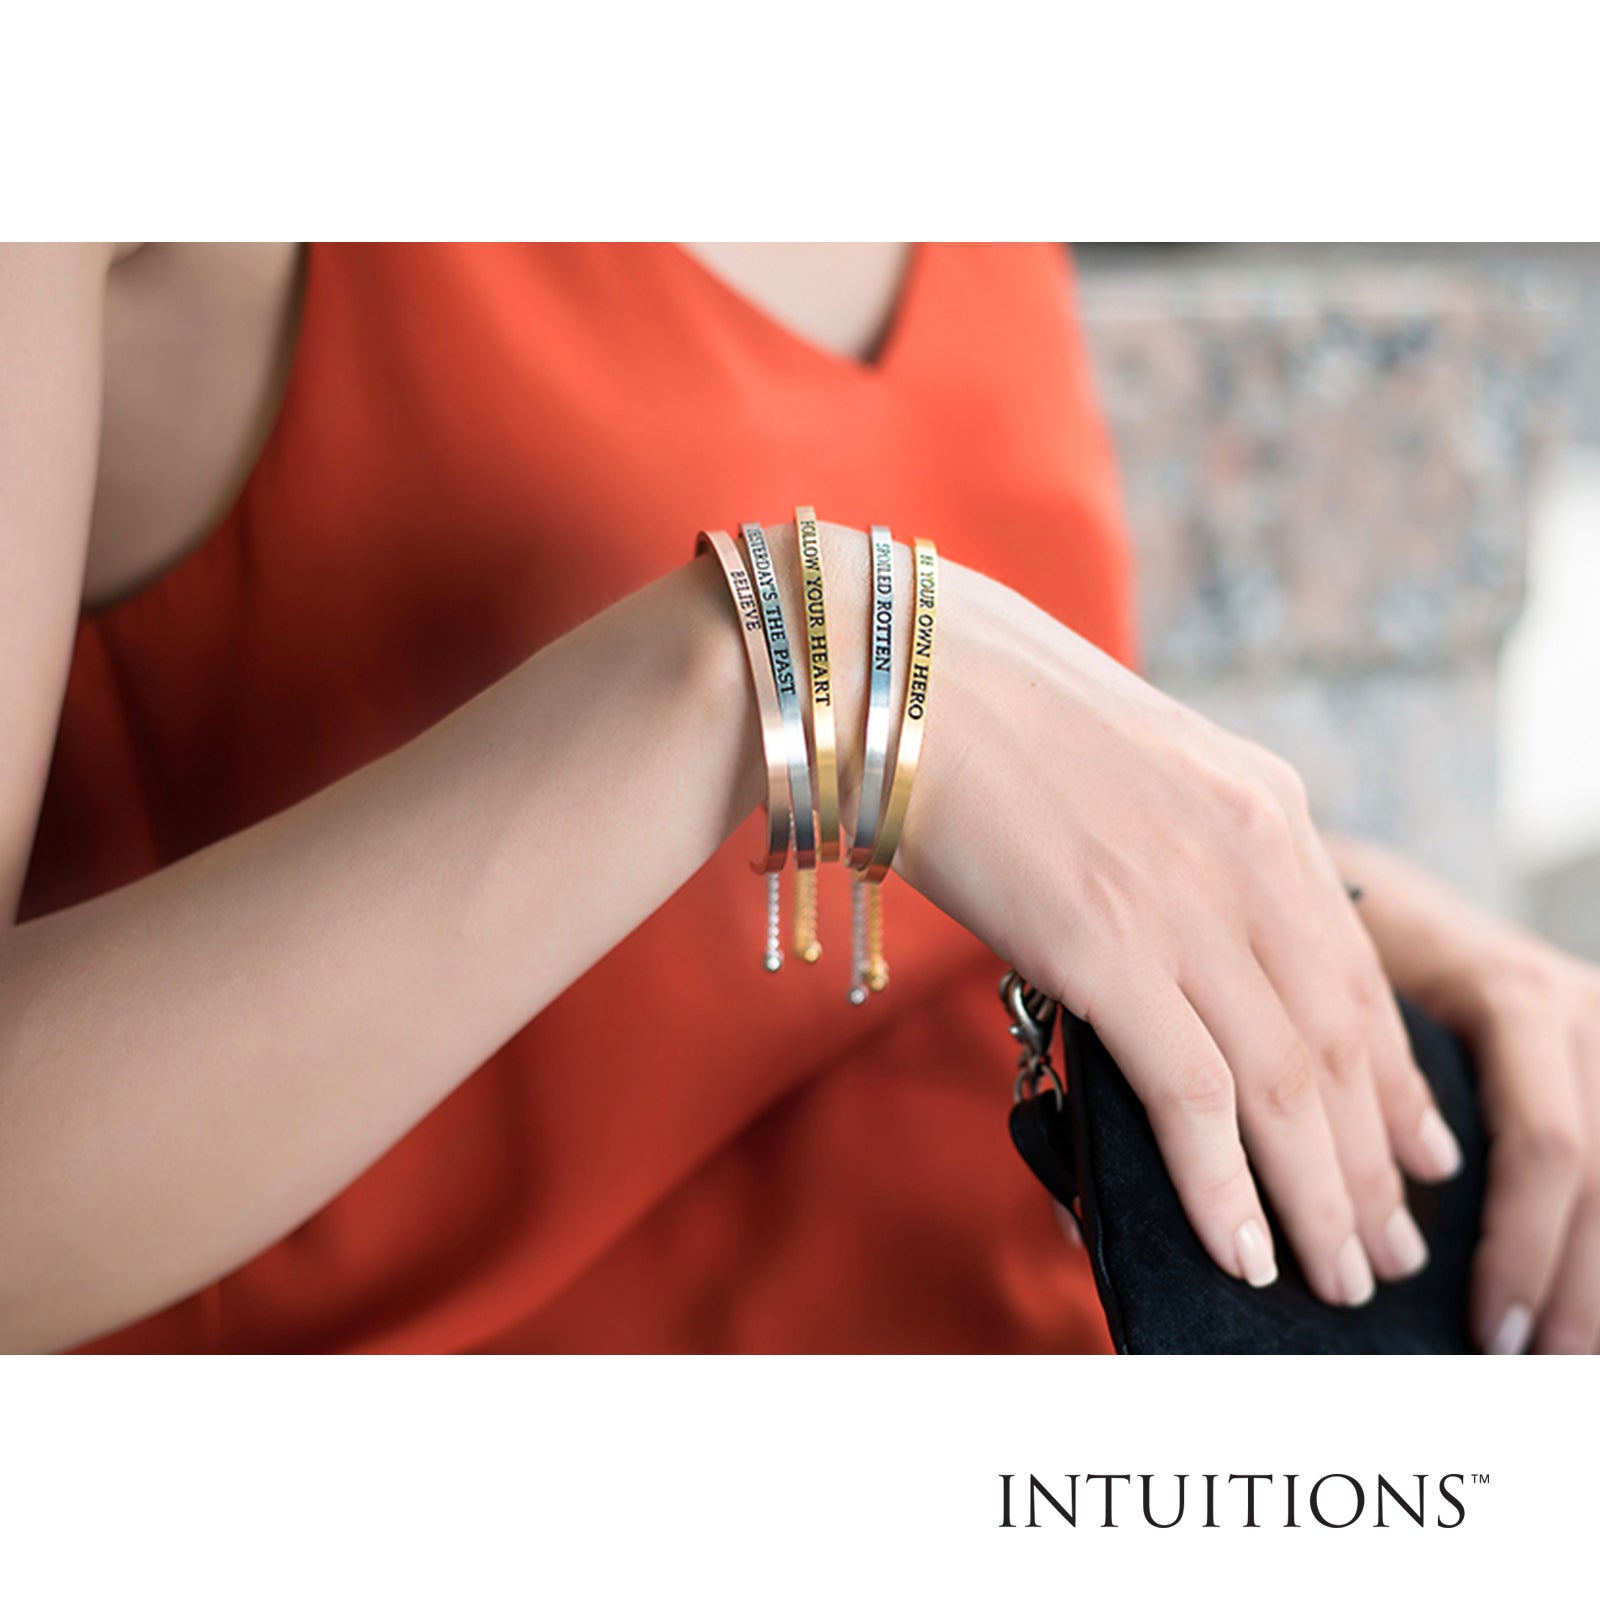 Intuitions Stainless Steel PATIENCE IS A VIRTUE Diamond Accent Cuff Bangle Bracelet